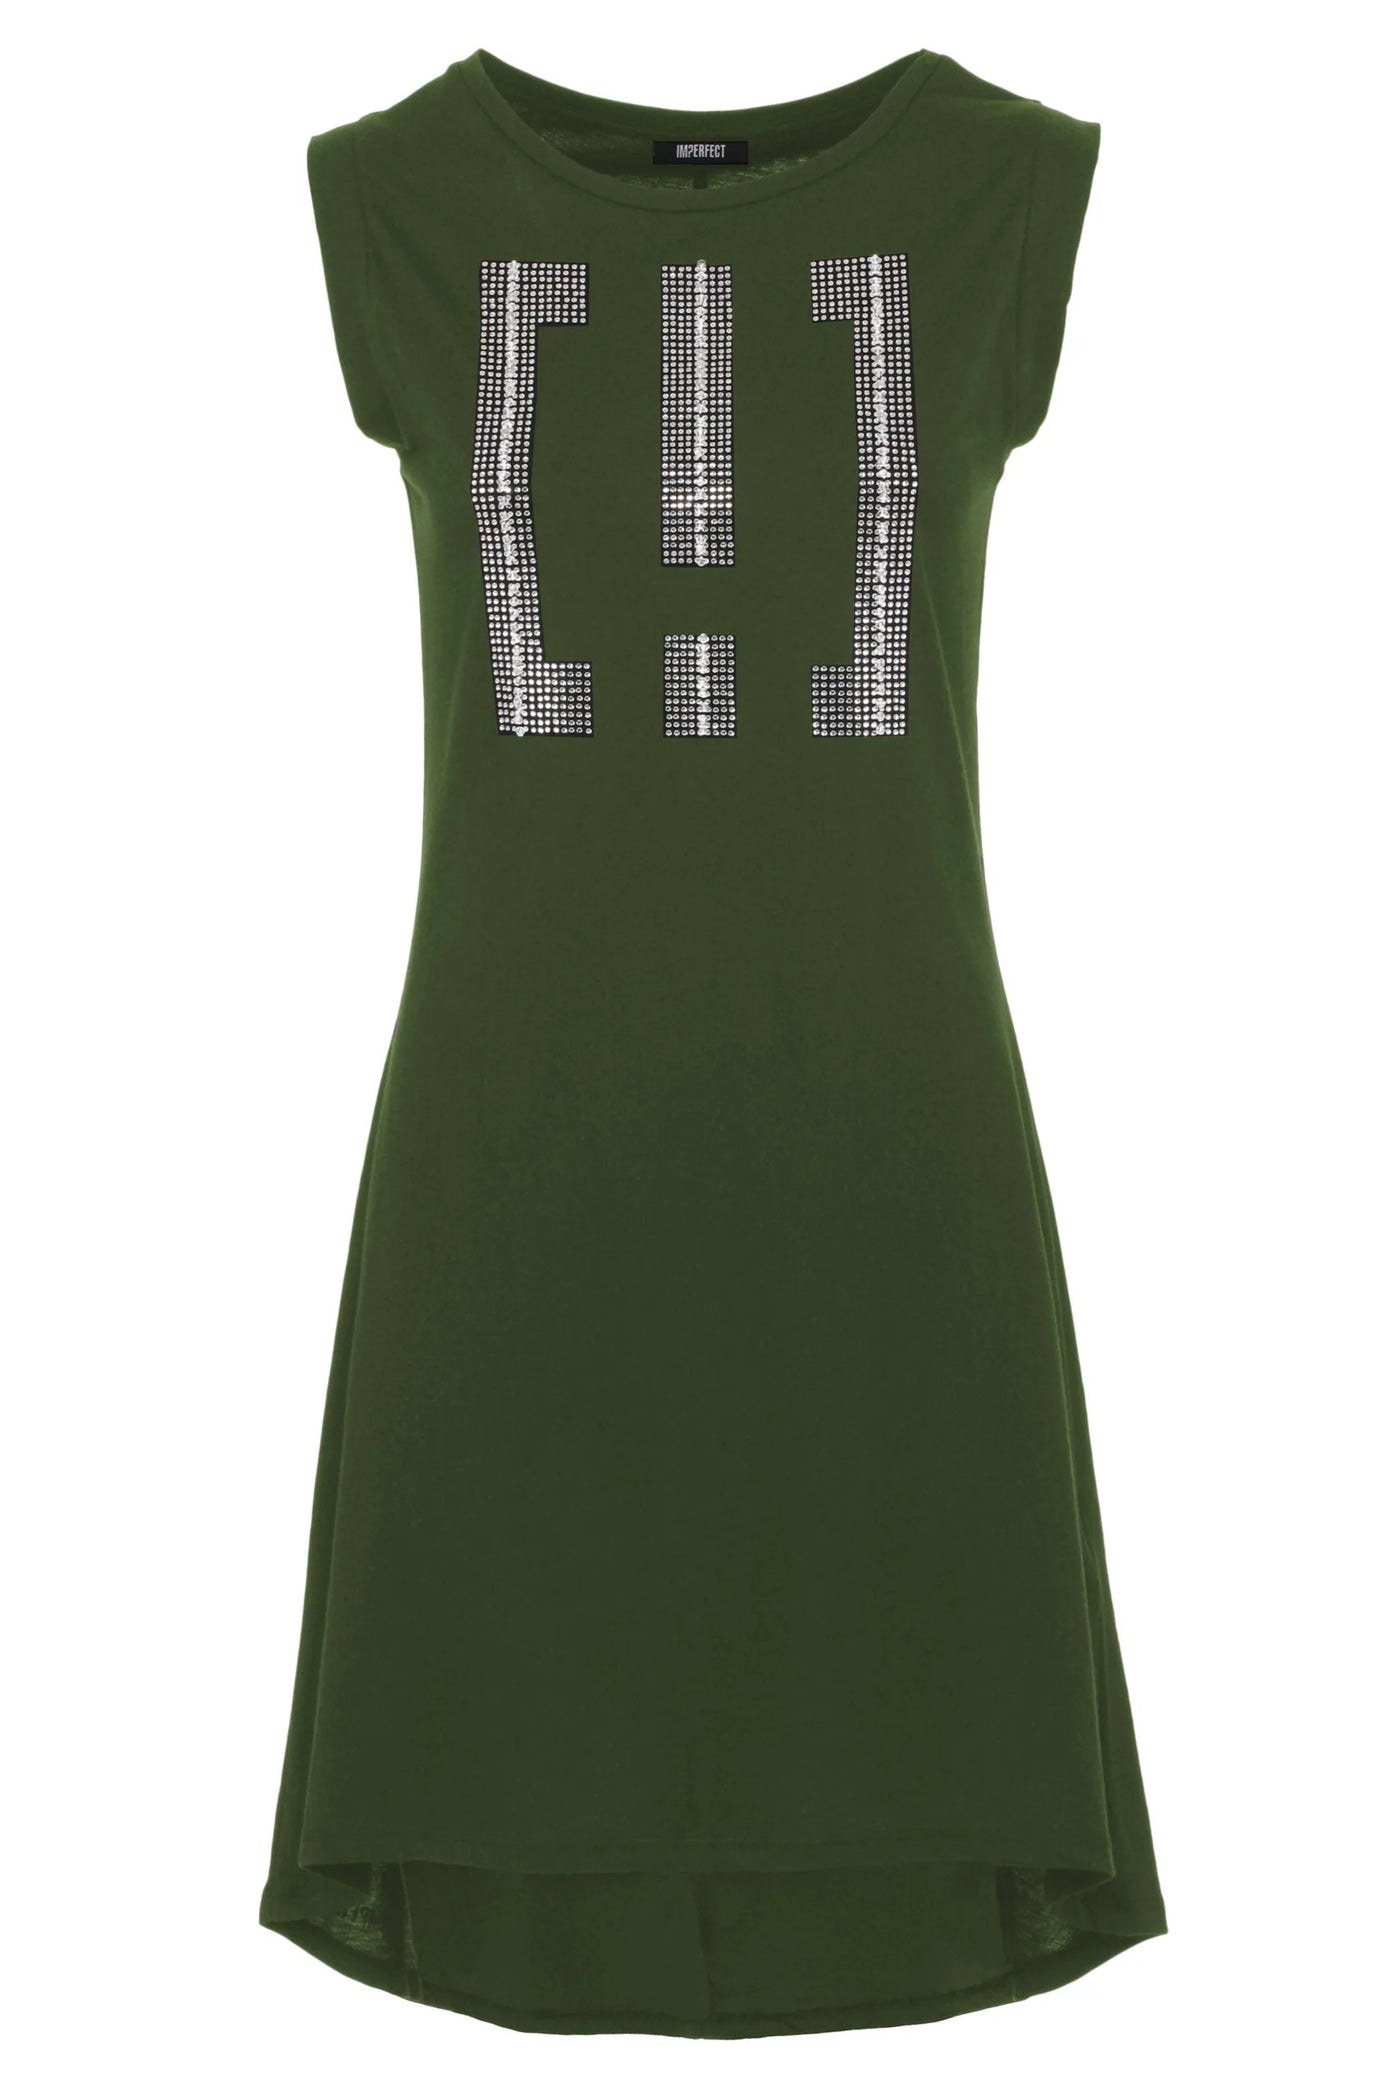 Imperfect cotton embellished with rhinestones and beads Dress Dresses - Women - Clothing, feed-agegroup-adult, feed-color-Green, feed-gender-female, Green, Imperfect, L, M, S, XL, XS at SEYMAYKA